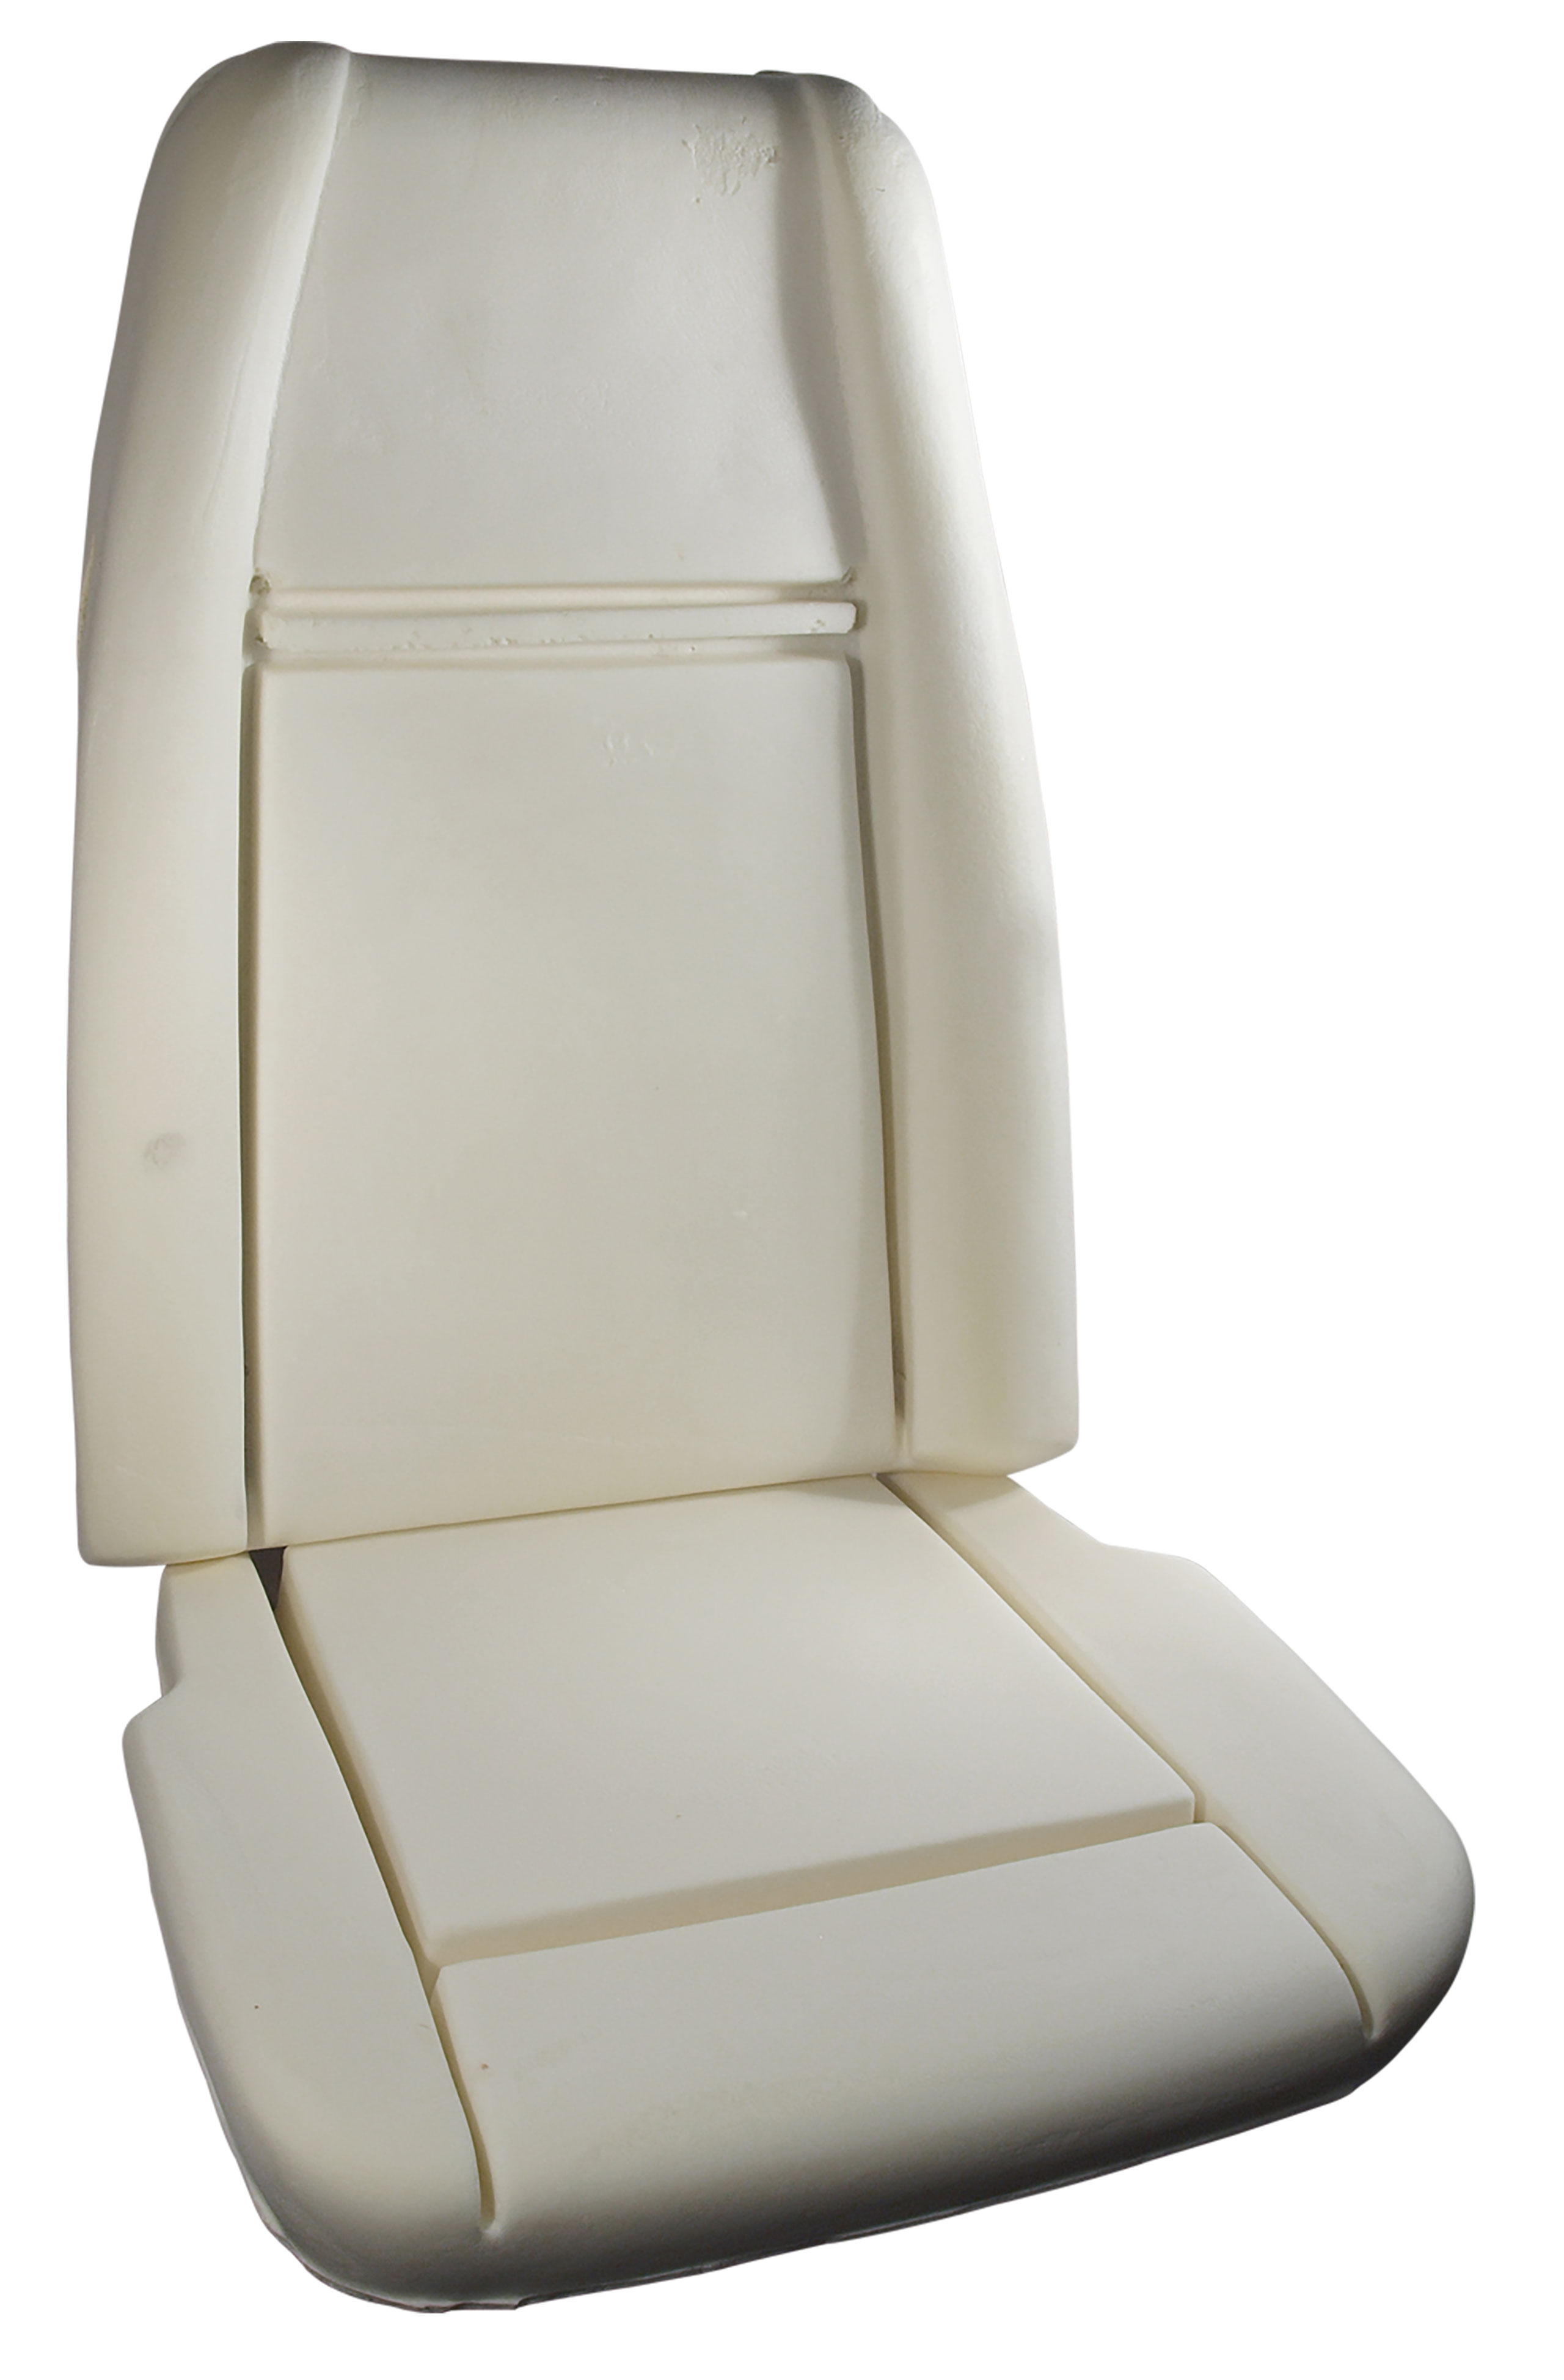 First Generation 1970 Ford Mustang Seat Foam - Standard Or Deluxe - 1 Top & 1 Bottom - Auto Accessories of America